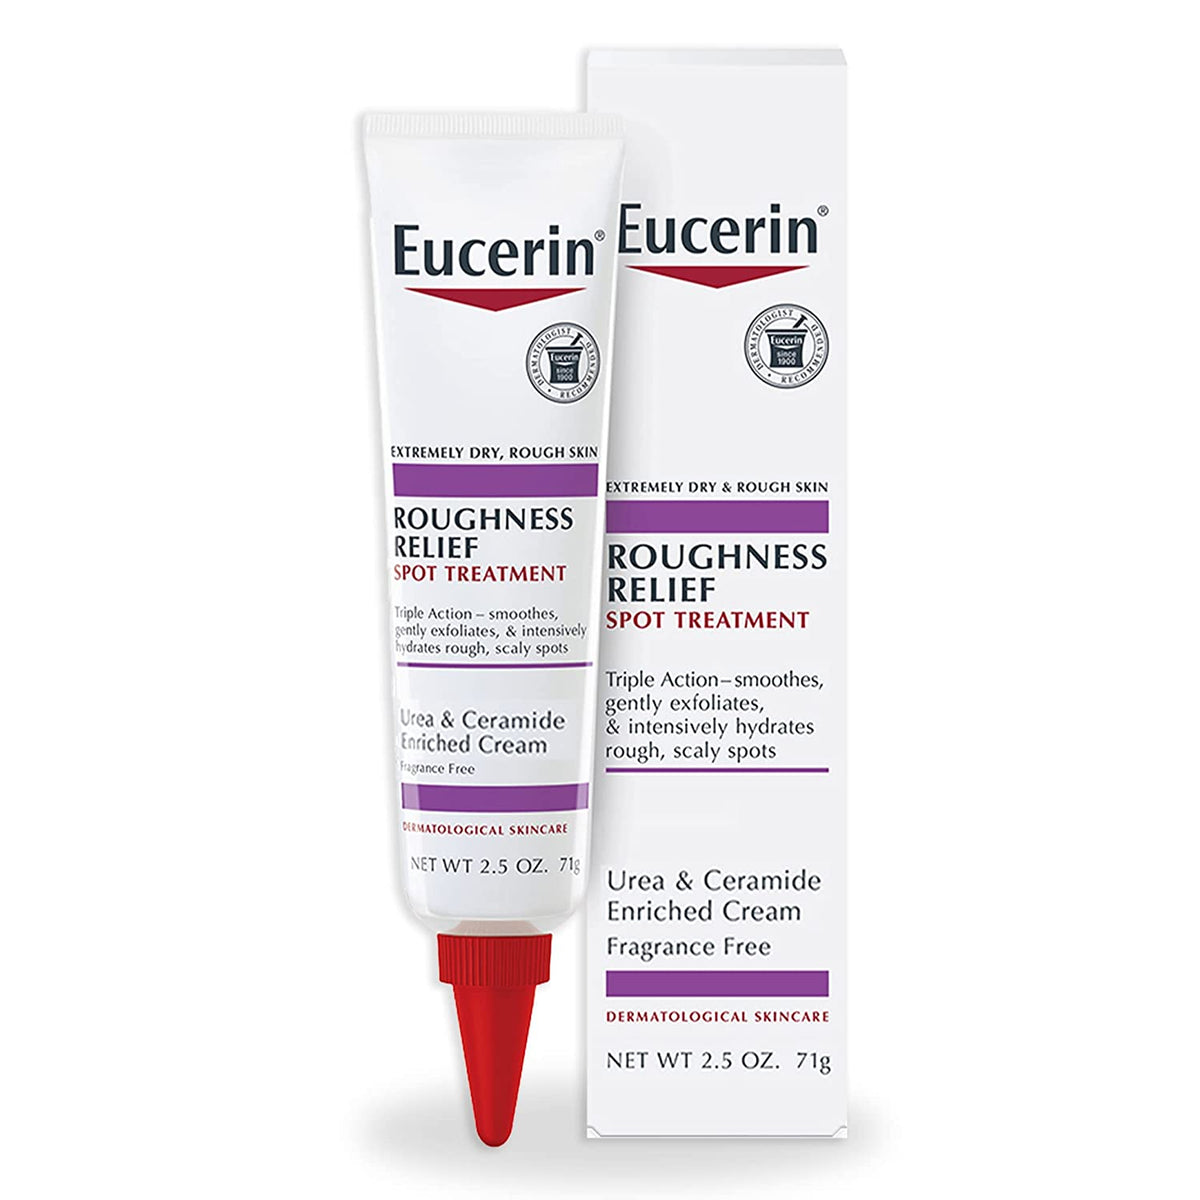 Eucerin - Roughness Relief Spot Treatment 71g